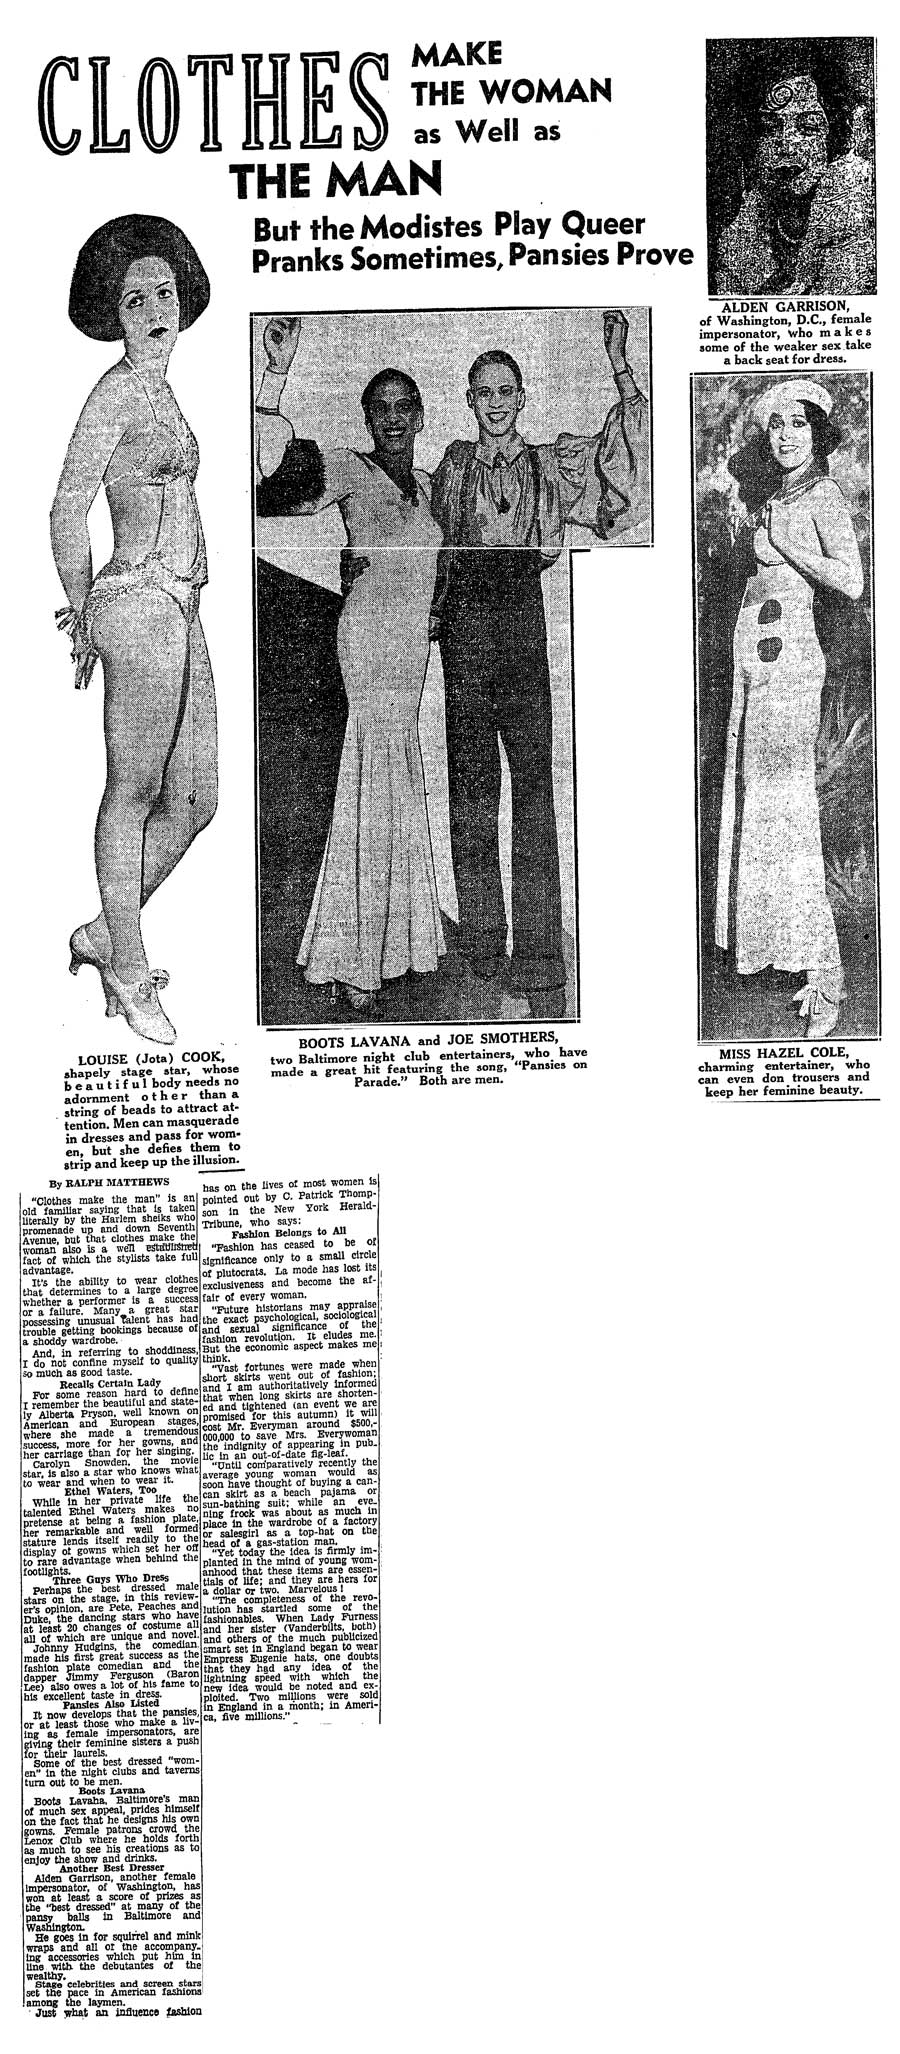 Image of a 1930s newspaper article